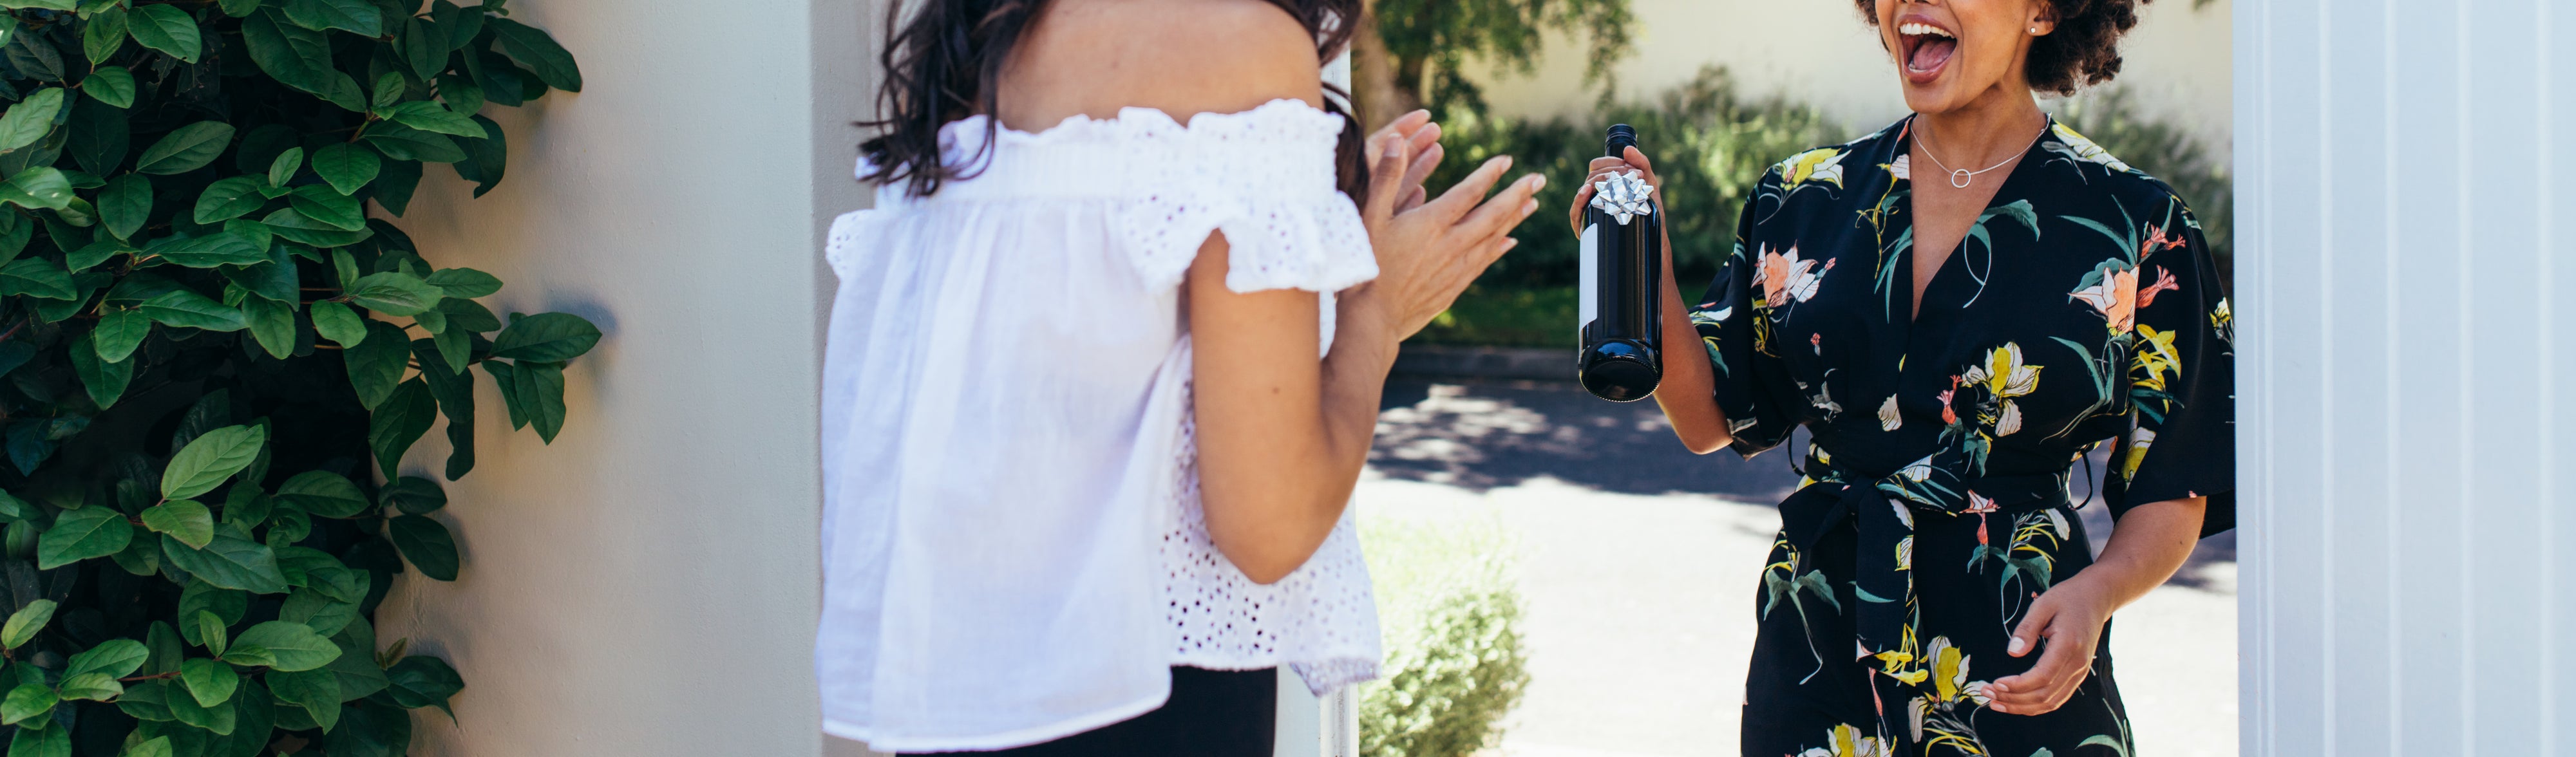 Woman giving a wine bottle her friends at entrance door